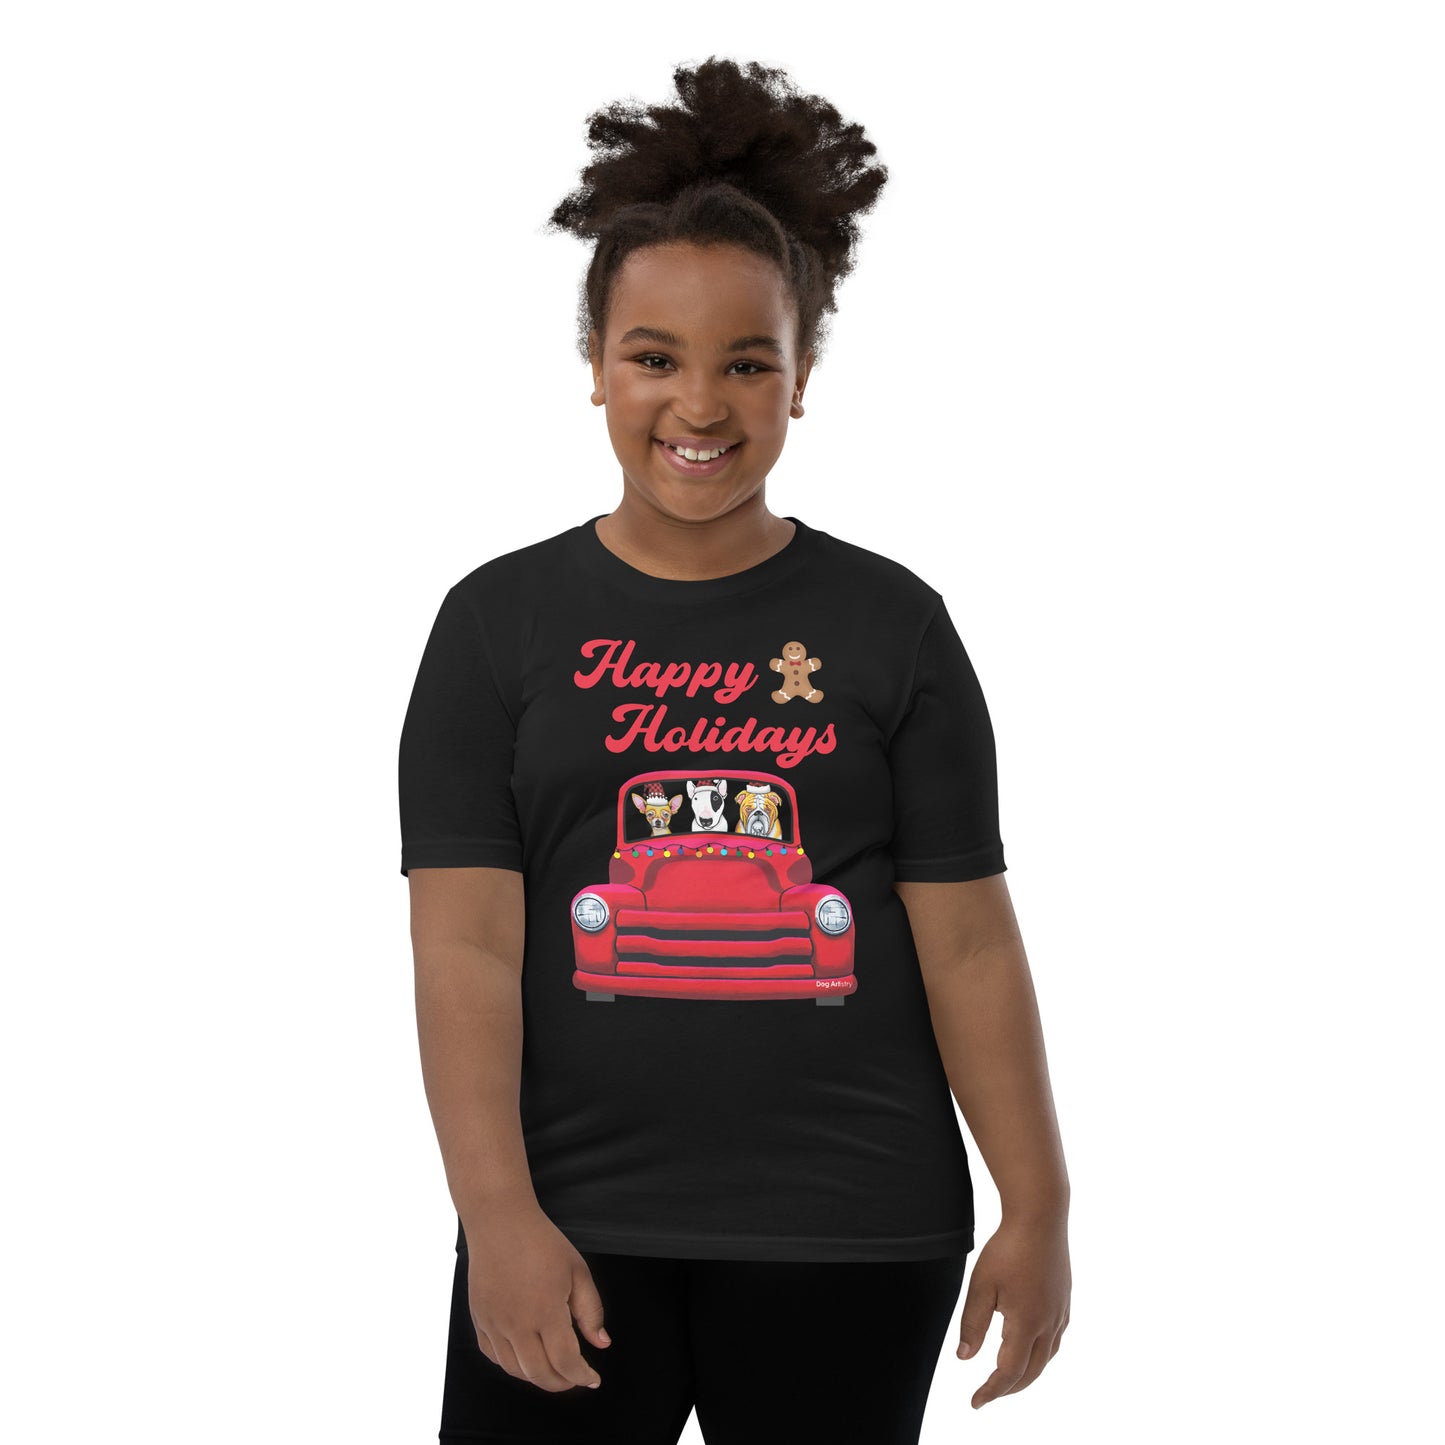 Red Holiday truck with Chihuahua, English Bull Terrier, and English Bulldog riding in it youth t-shirt black by Dog Artistry